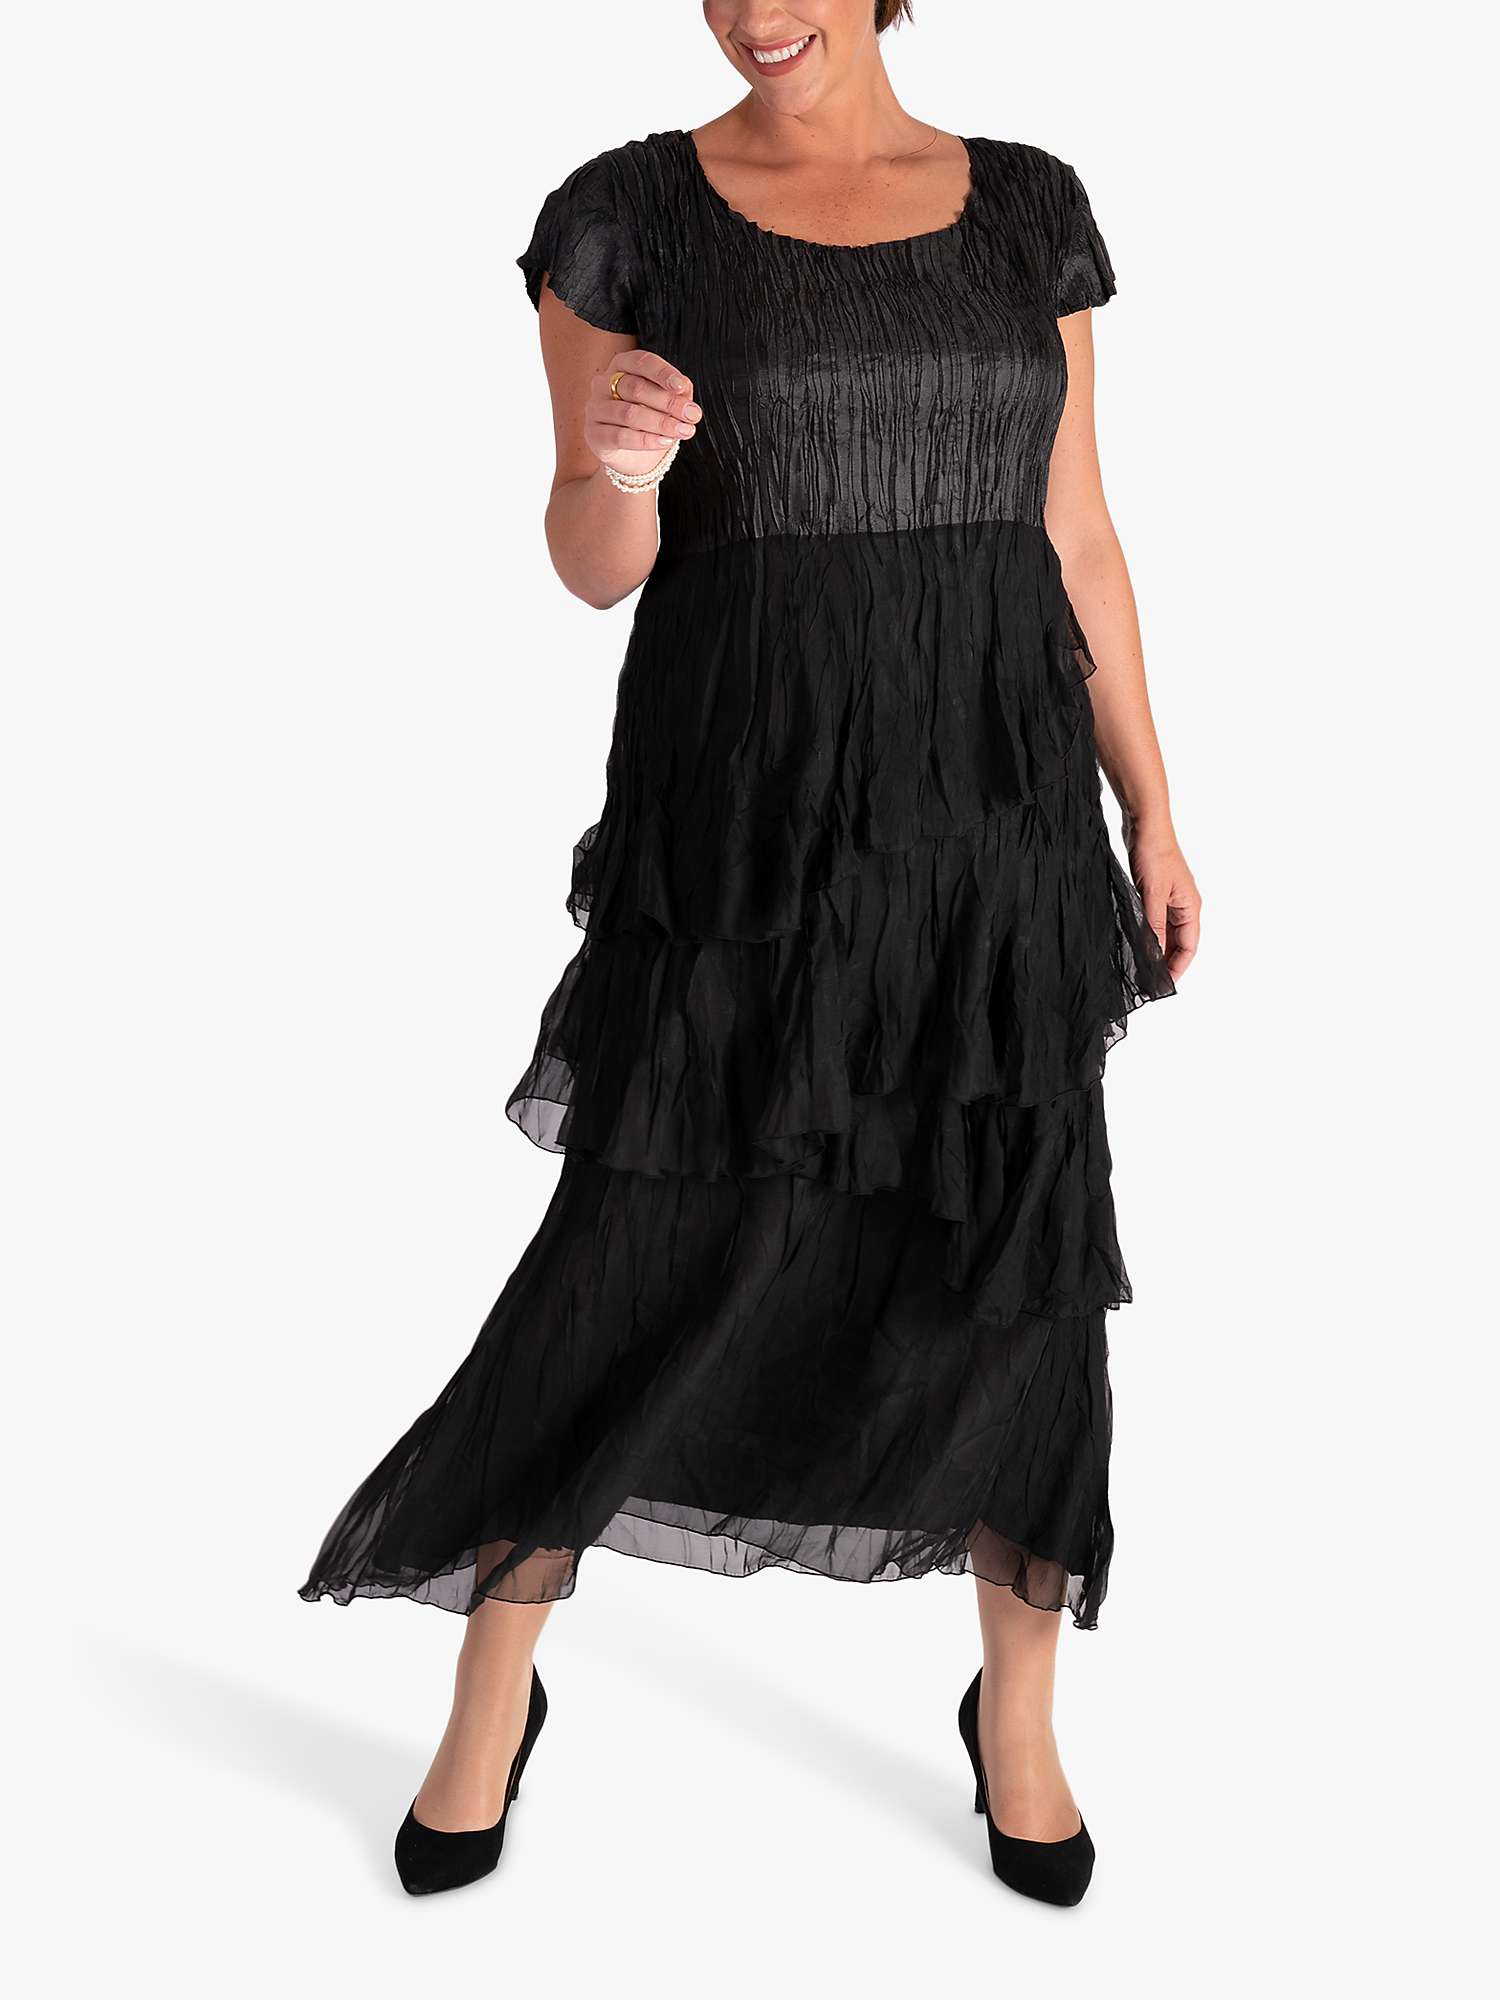 Buy chesca Tiered Midi Dress Online at johnlewis.com